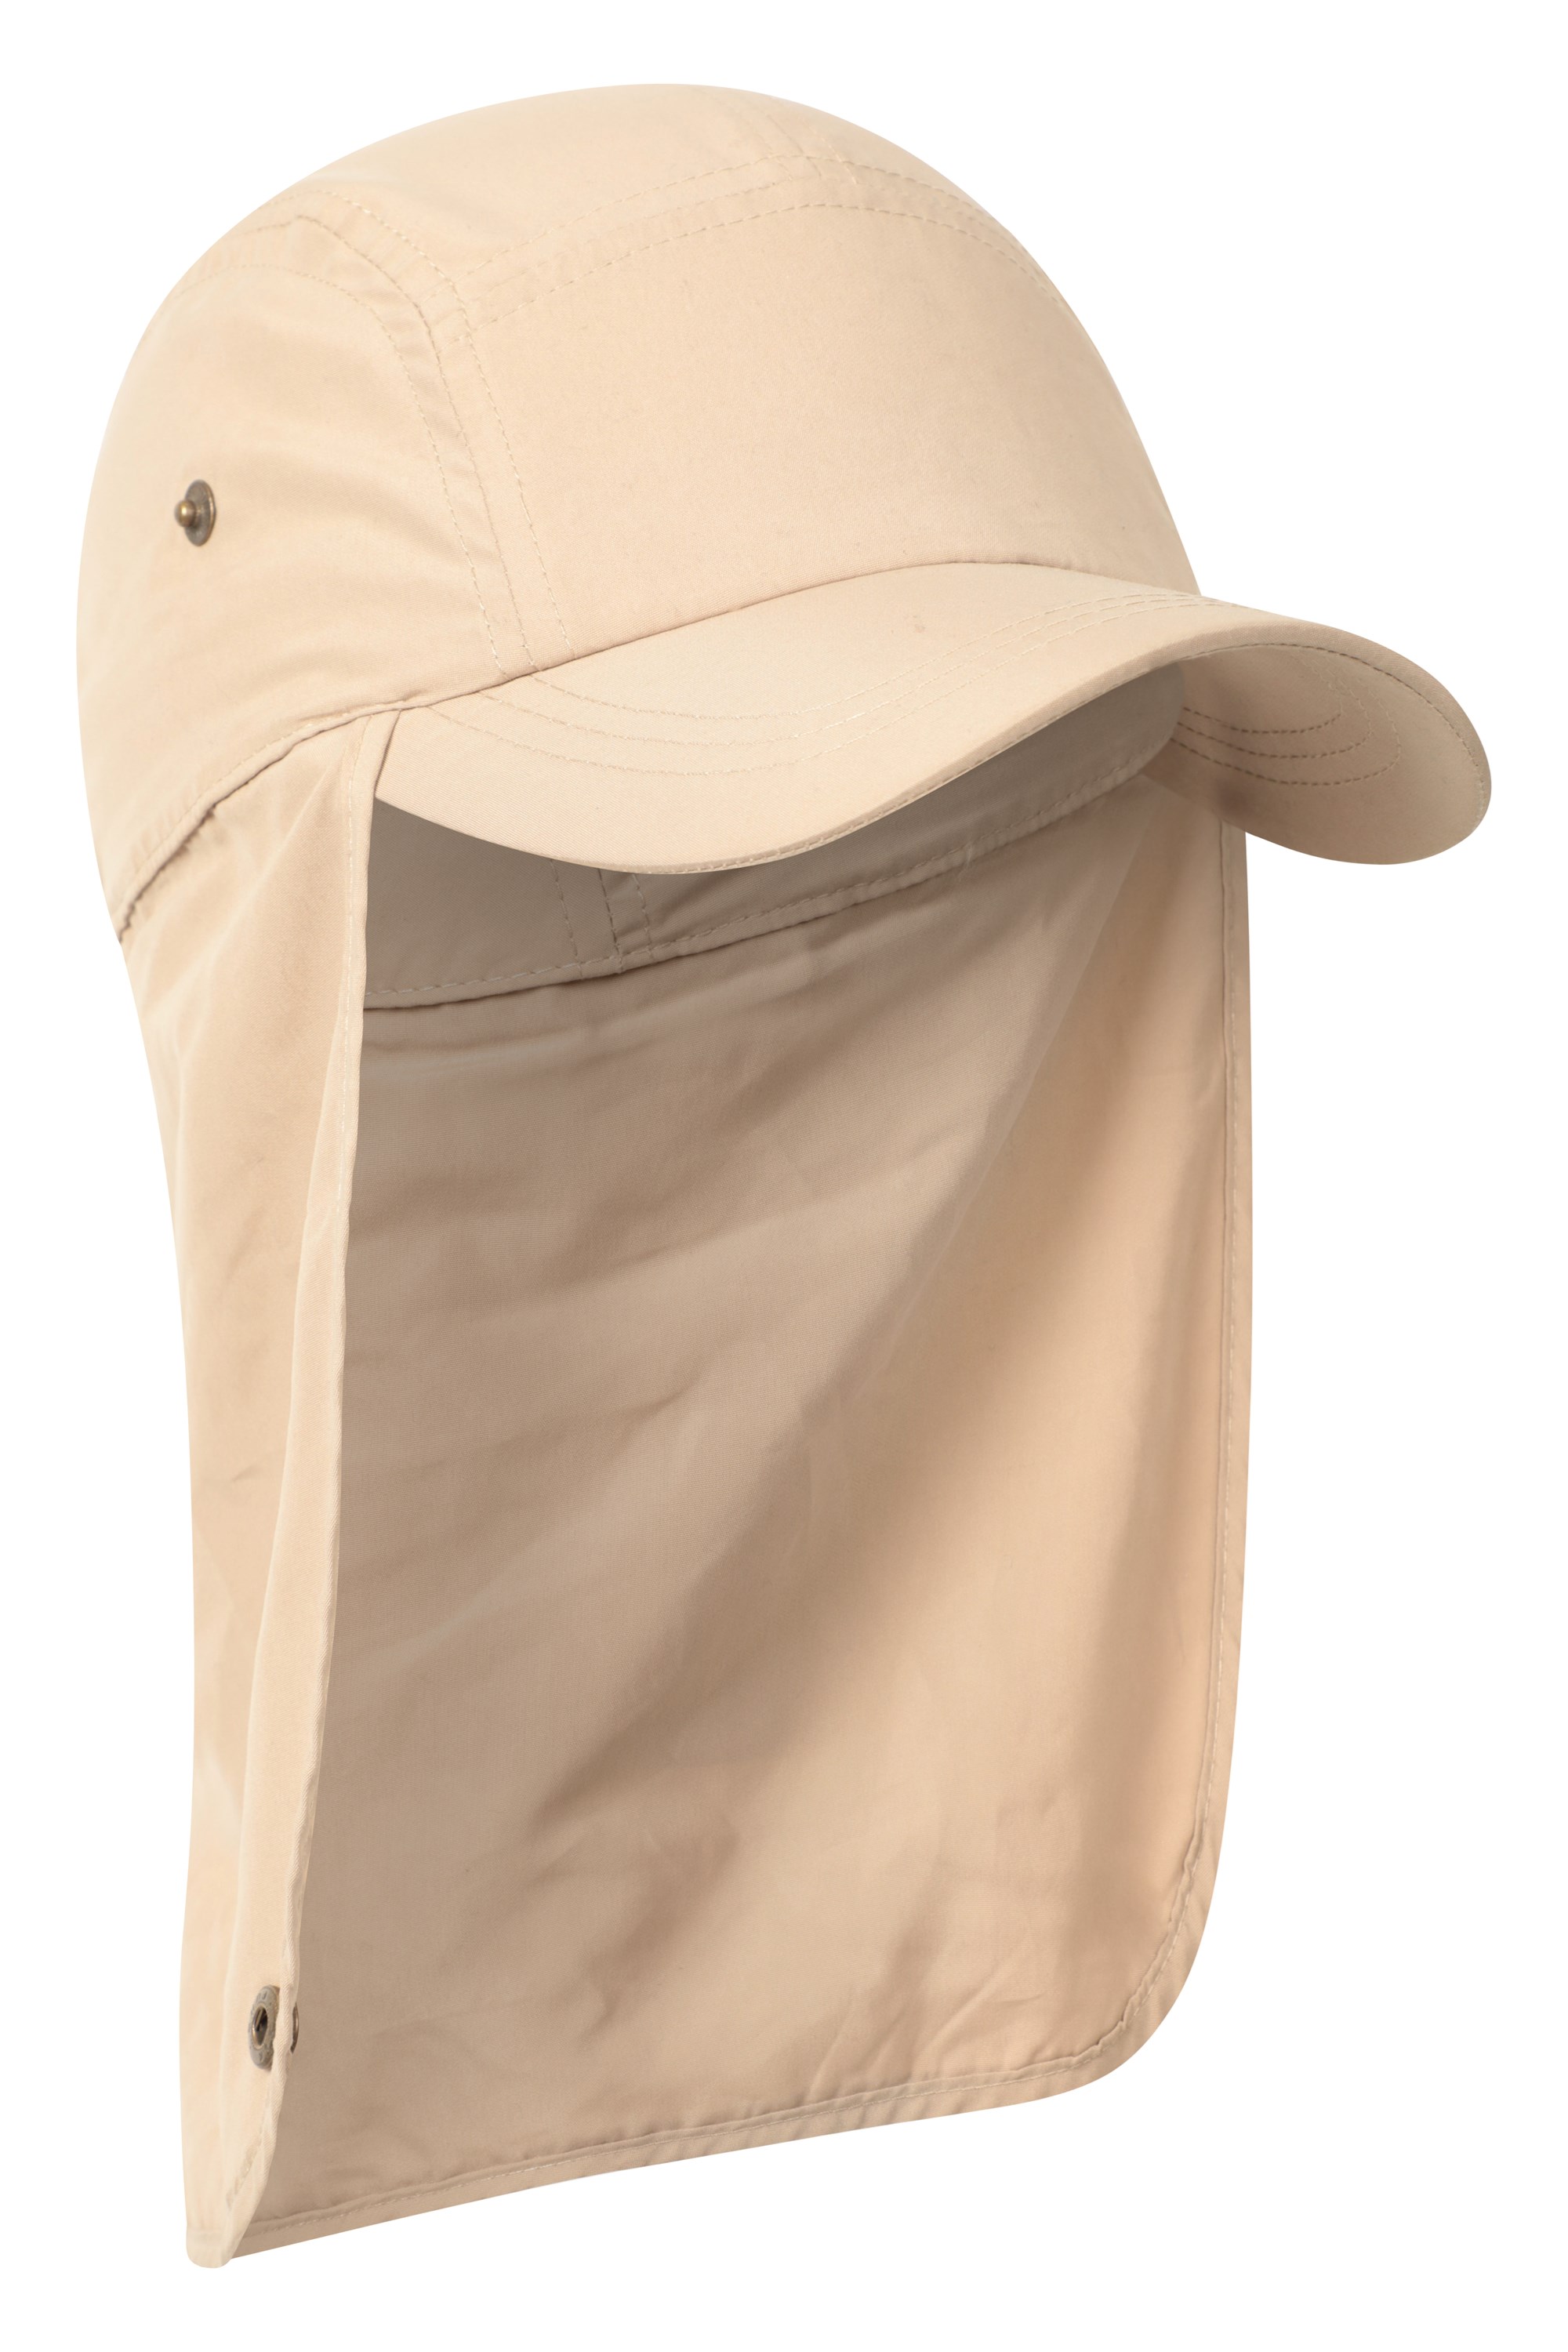 Outback Womens Coverage Cap - Beige